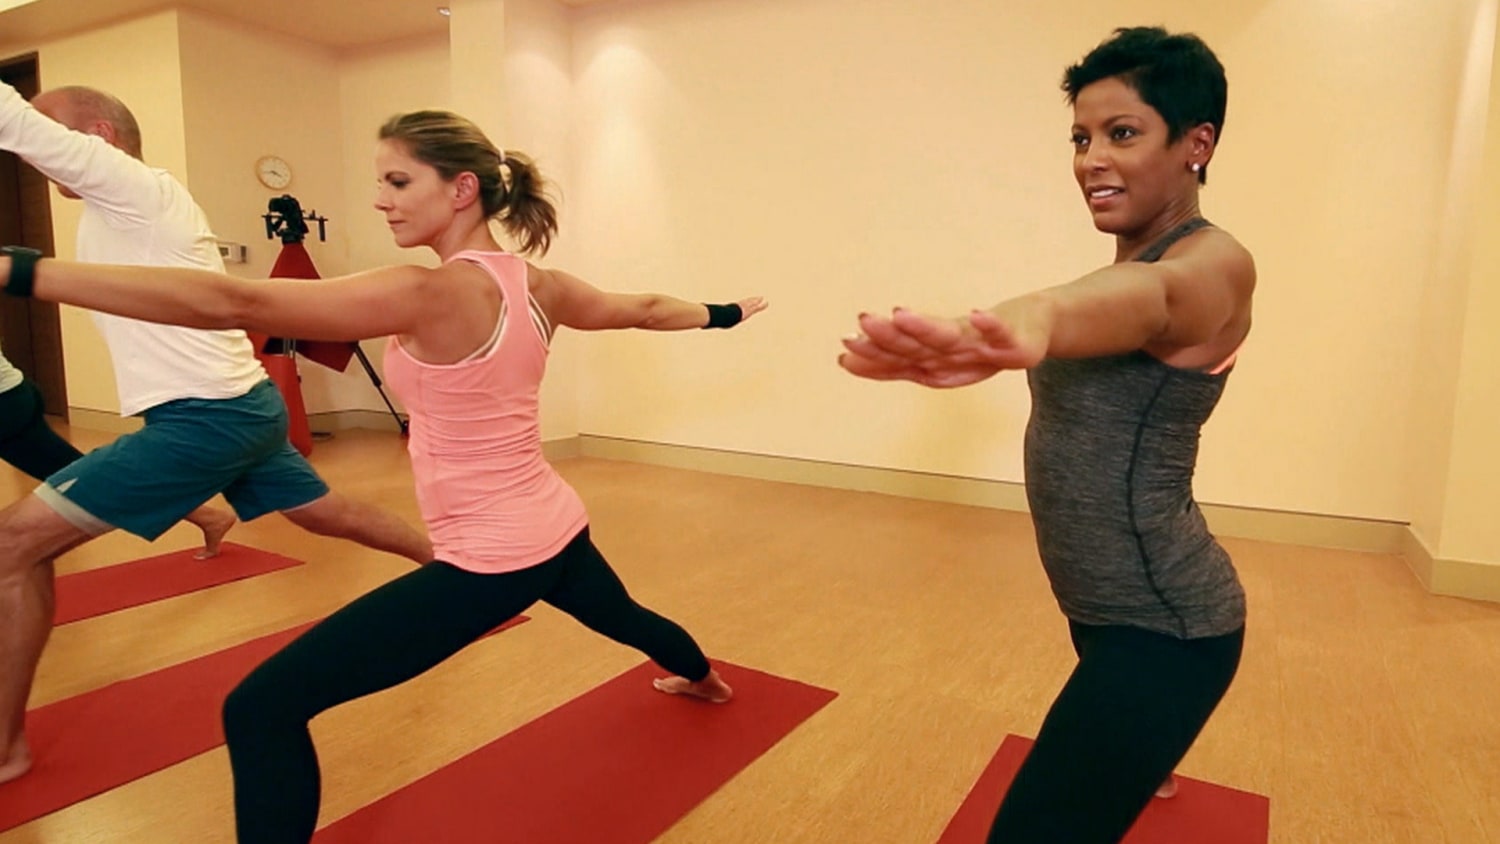 Hot Yoga: Get hot with this 40-degree yoga practice